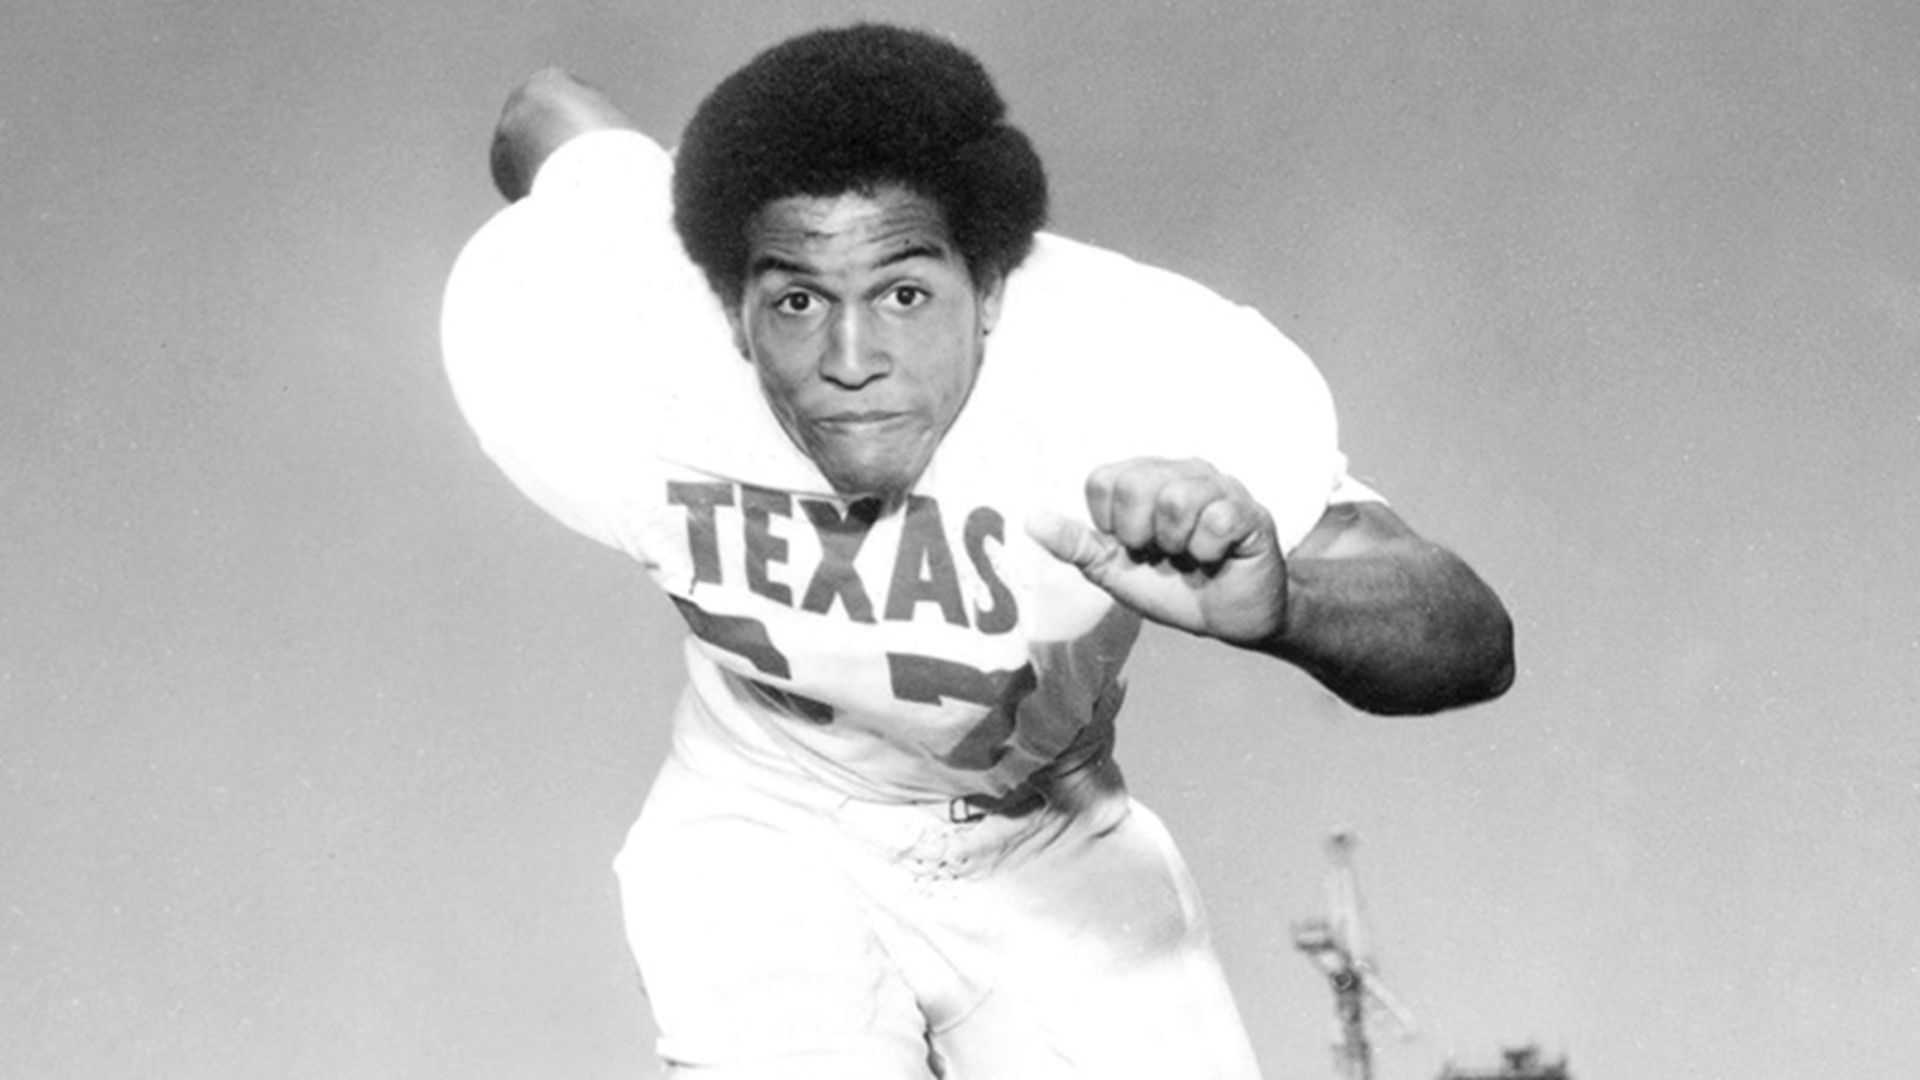 The Highlands High School graduate is one of the most notable figures in Texas football history becoming the program's first black letterman.